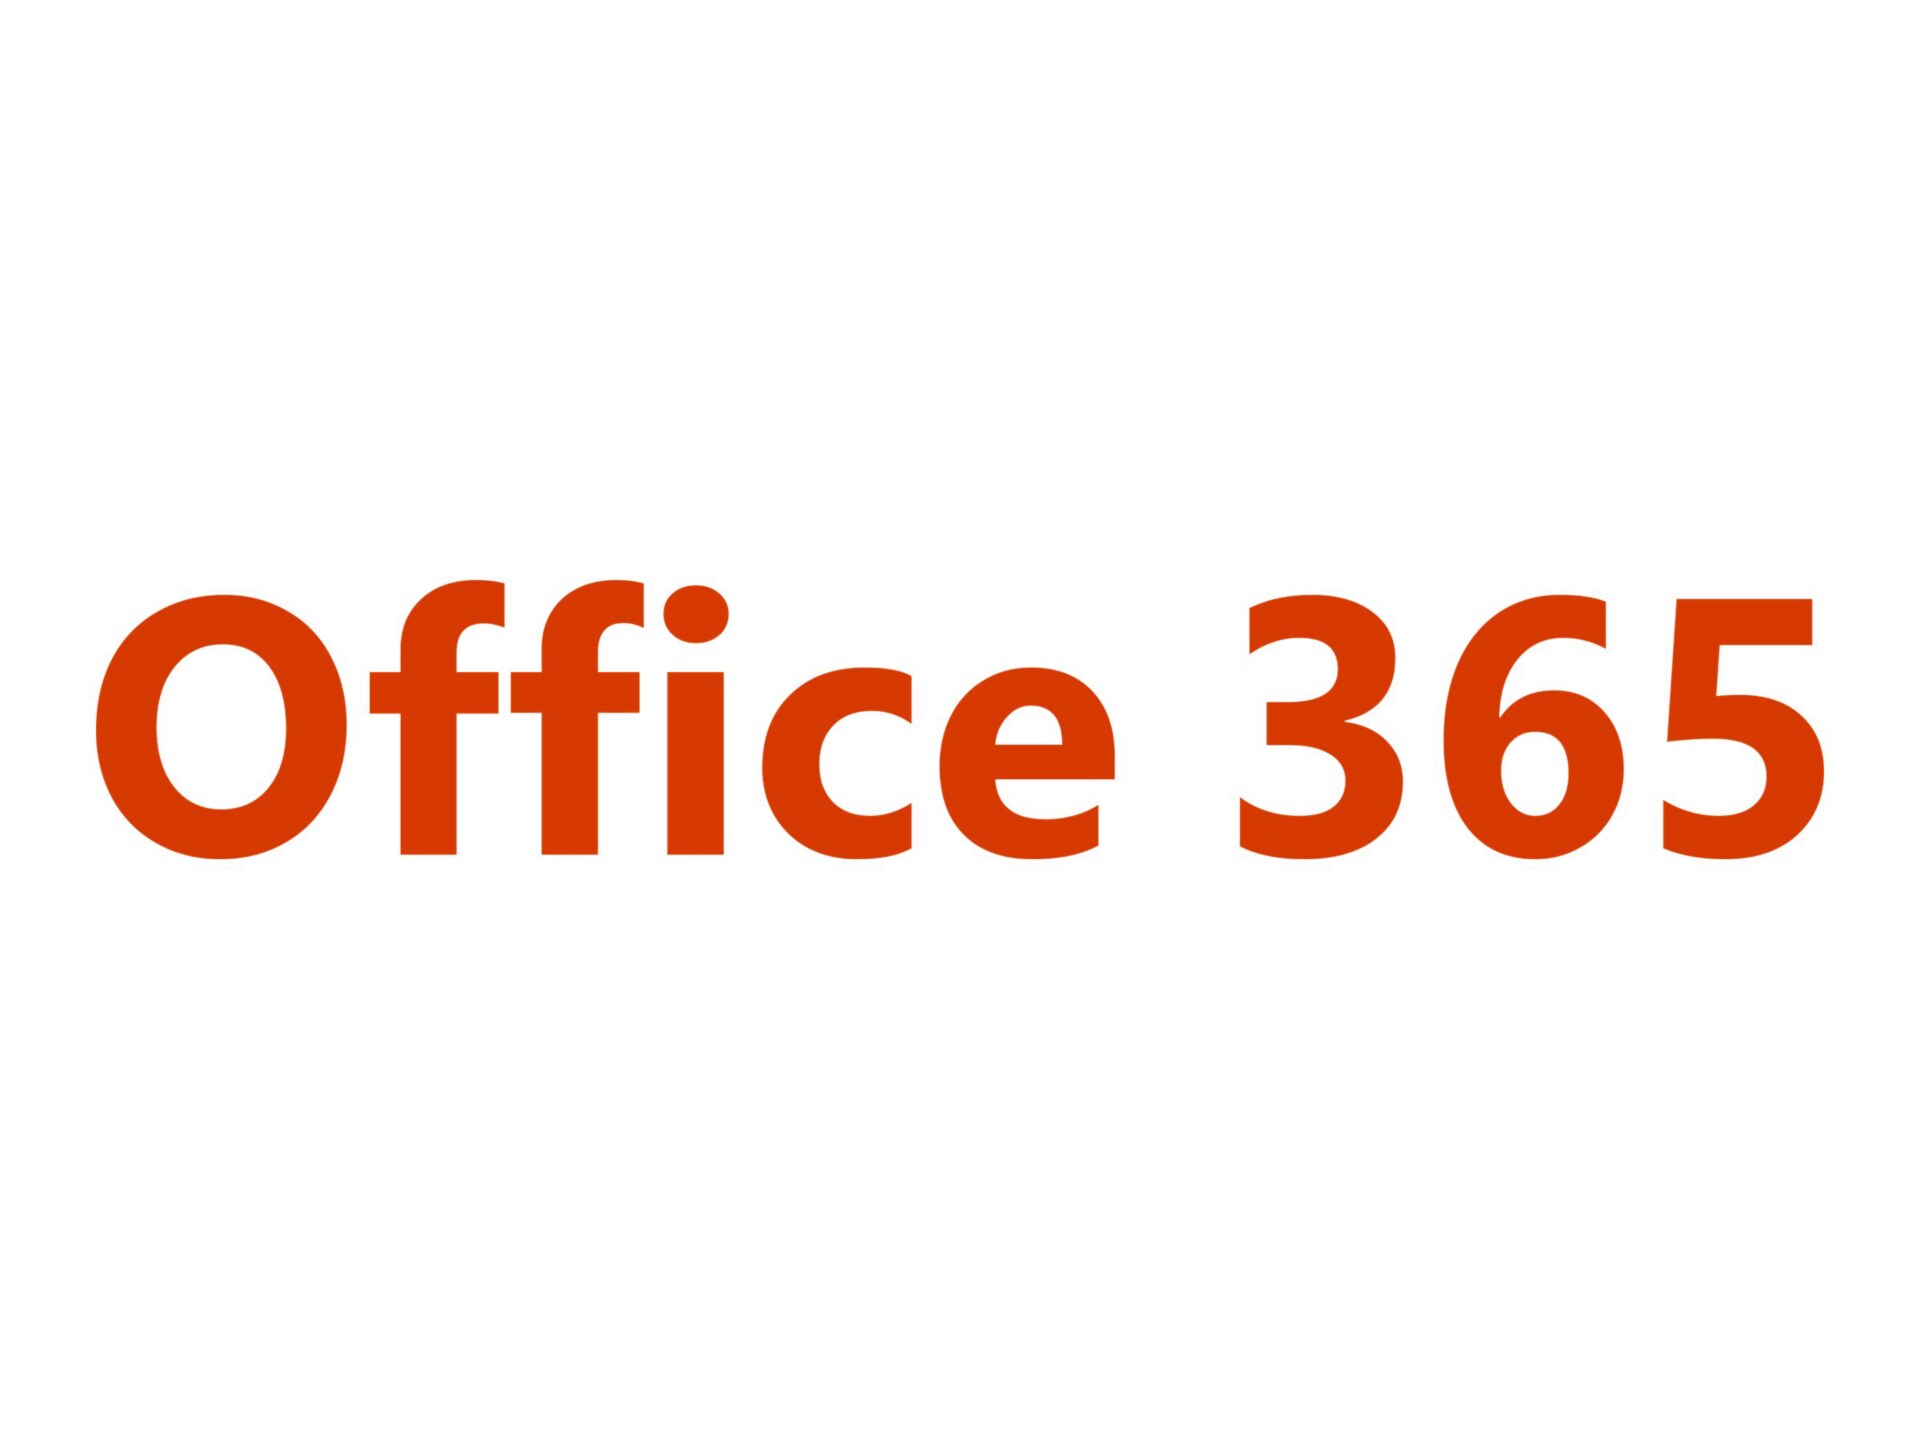 Microsoft Office 365 Enterprise F1 - subscription license (1 month) - 1 use